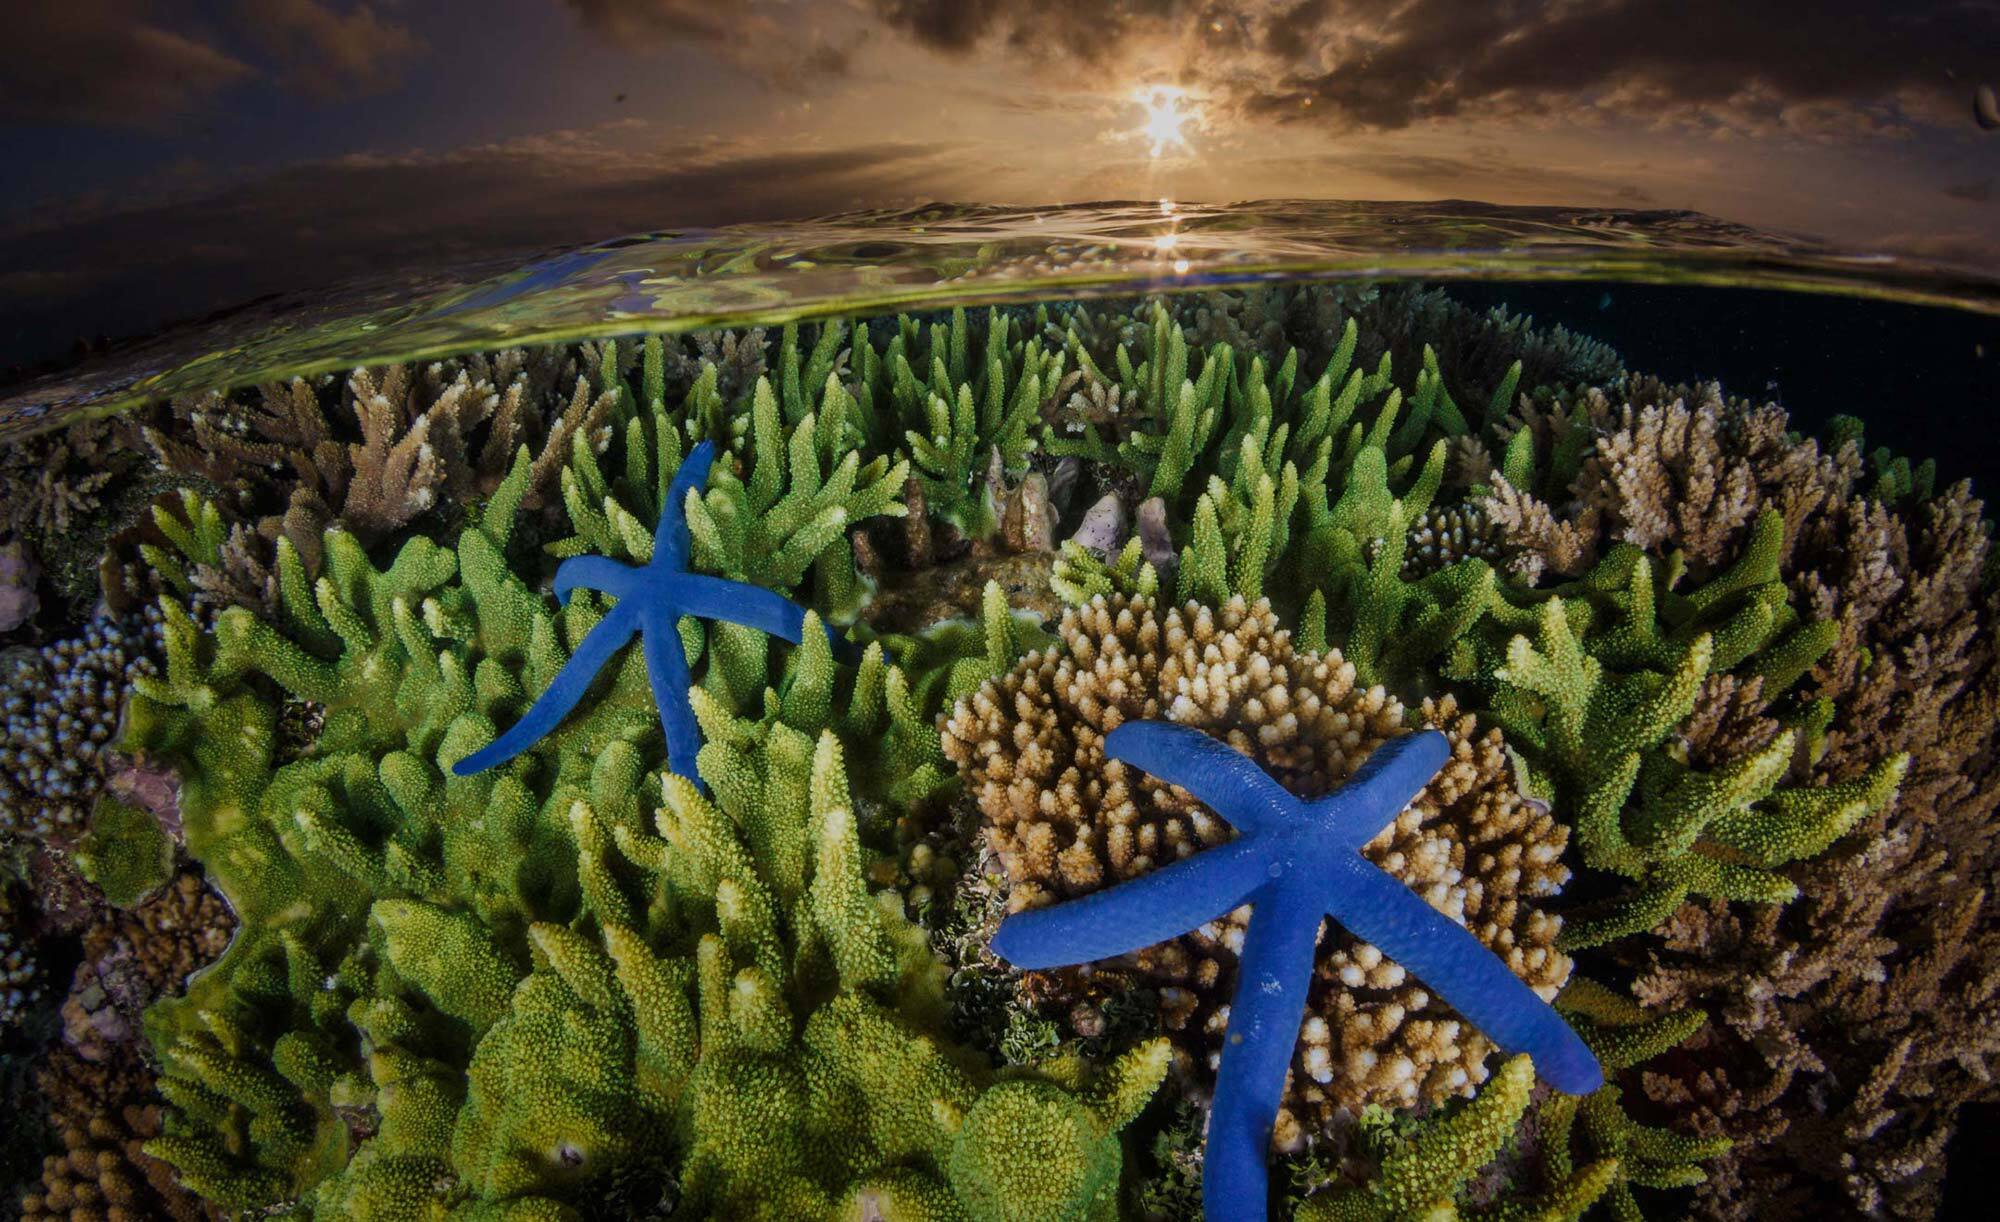 Blue starfish on hard coral at sunset in Indonesia